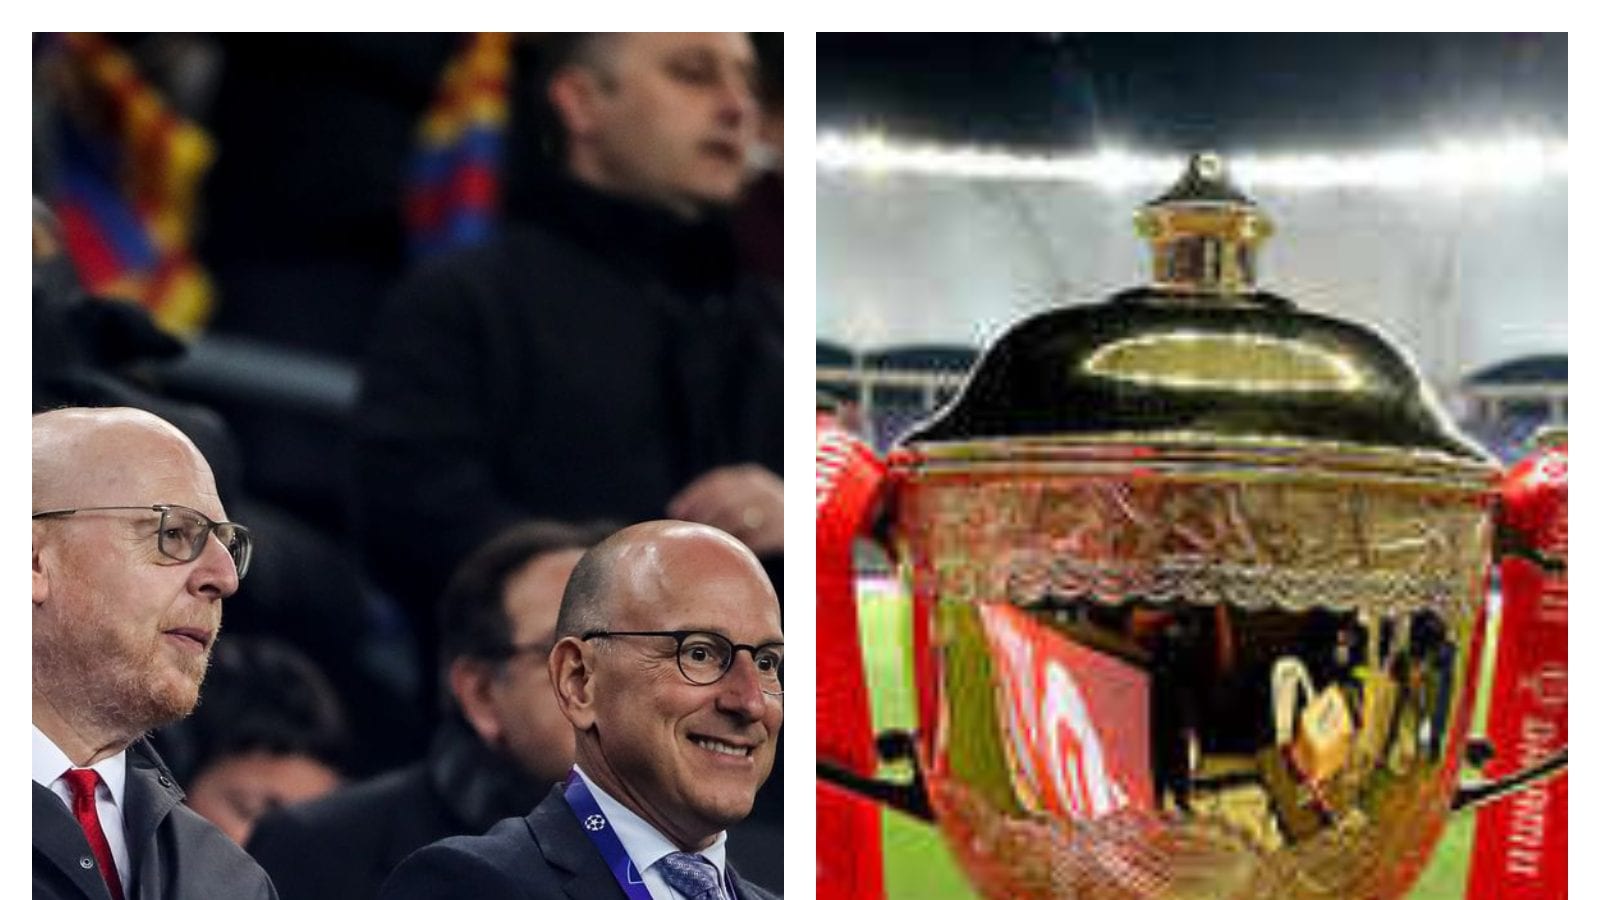 Glazer Family, Manchester United Owners, Shows Interest in Two New IPL 2022 Franchises-Report